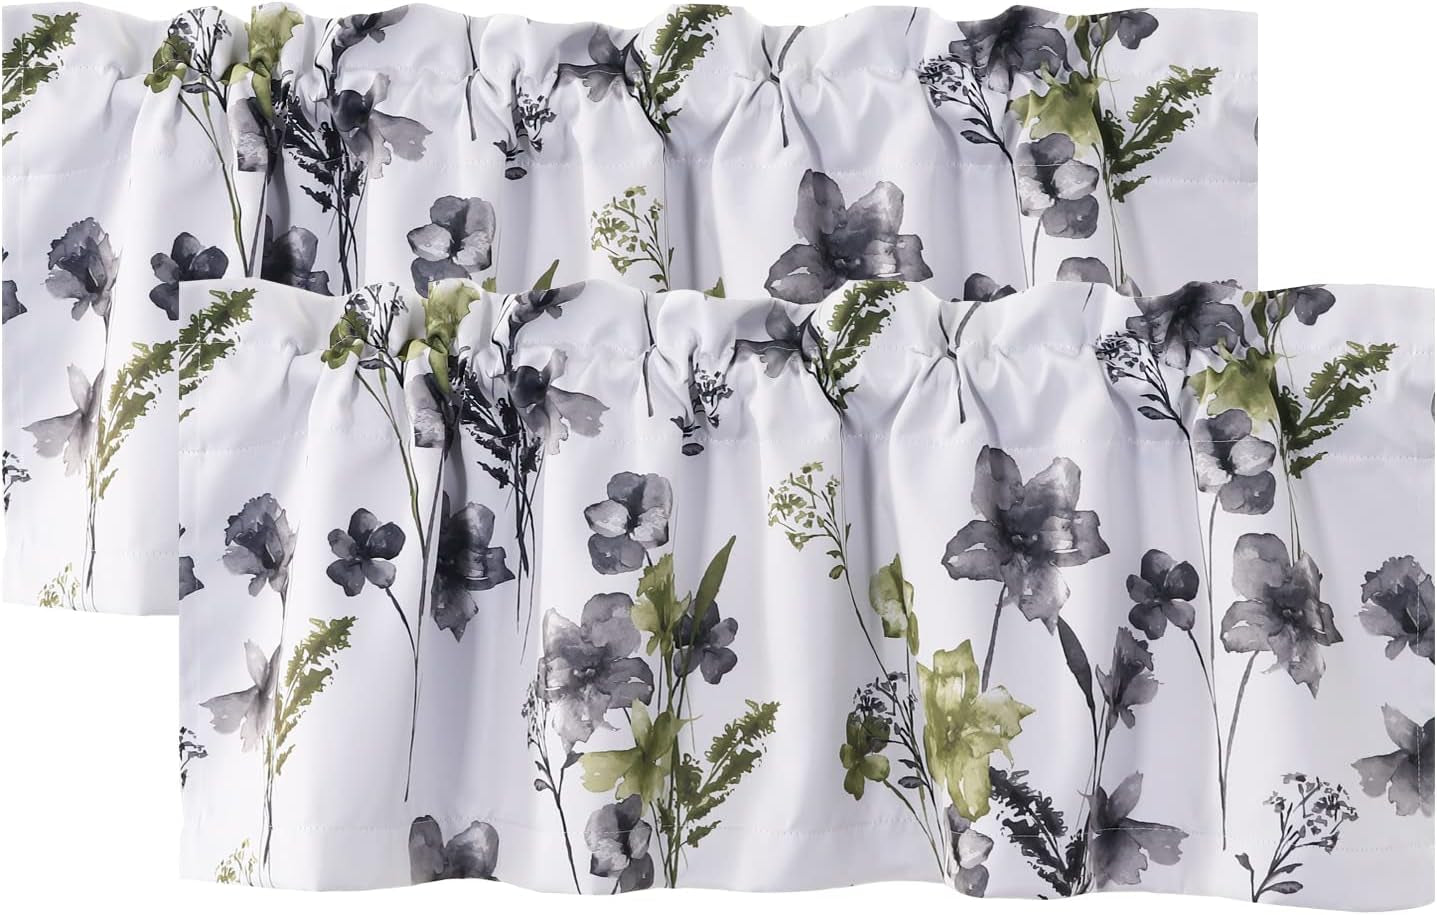 H.VERSAILTEX 100% Blackout Curtains for Bedroom Cattleya Floral Printed Drapes 84 Inches Long Leah Floral Pattern Full Light Blocking Drapes with Black Liner Rod Pocket 2 Panels, Navy/Taupe  H.VERSAILTEX Grey/Olive 52"W X 18"L 